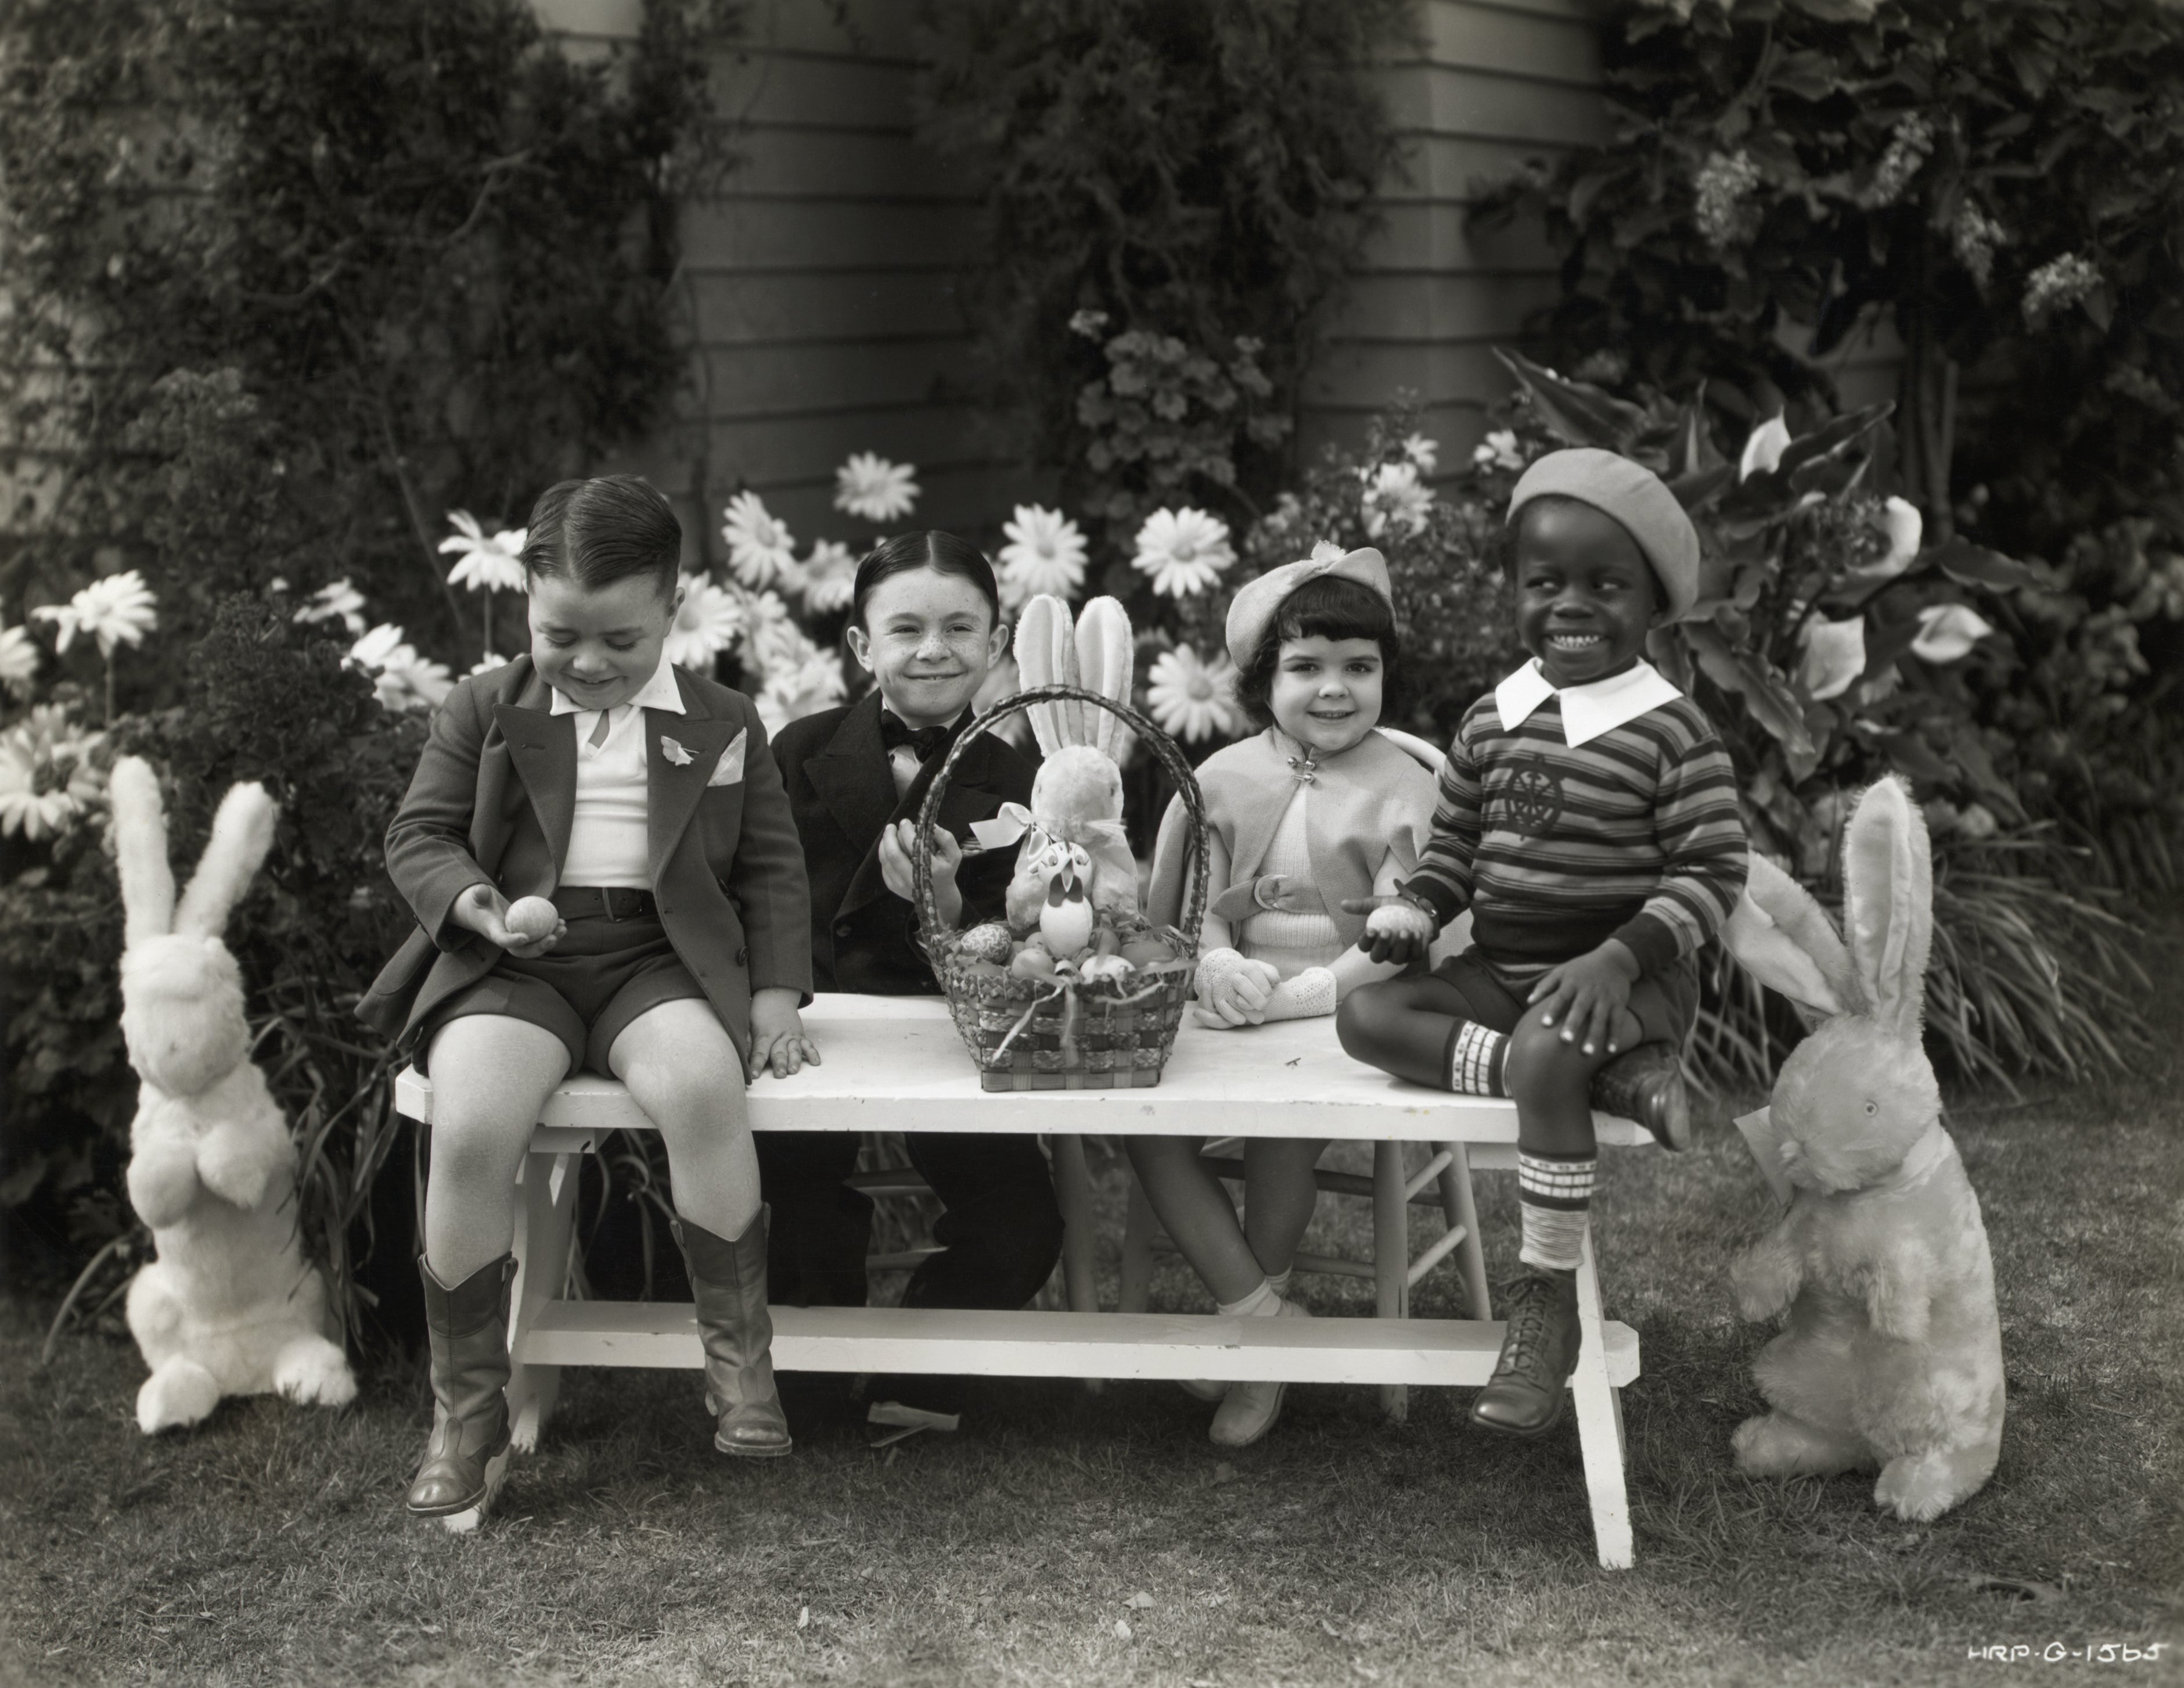 "Our Gang" kids celebrating Easter outdoors |Source: Getty Images